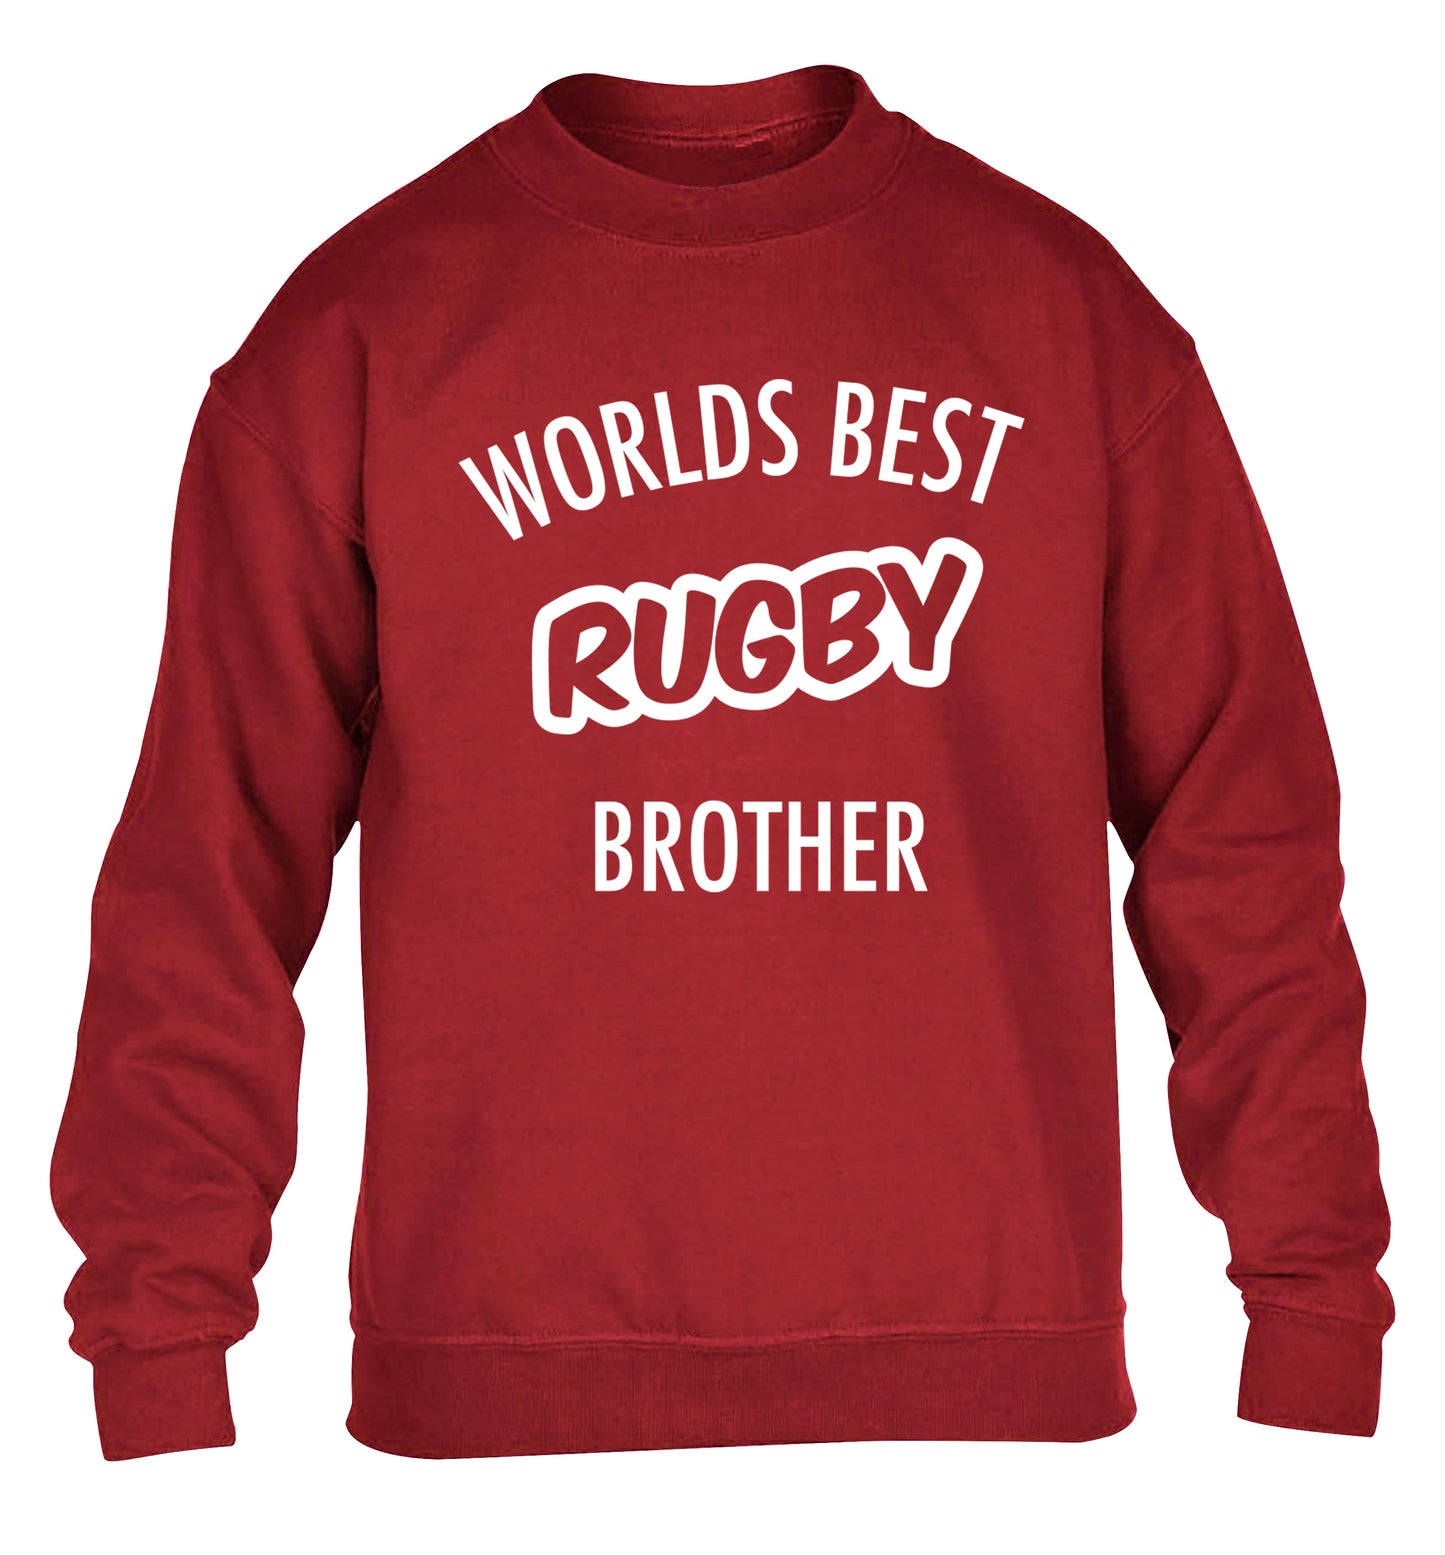 Worlds best rugby brother children's grey sweater 12-13 Years